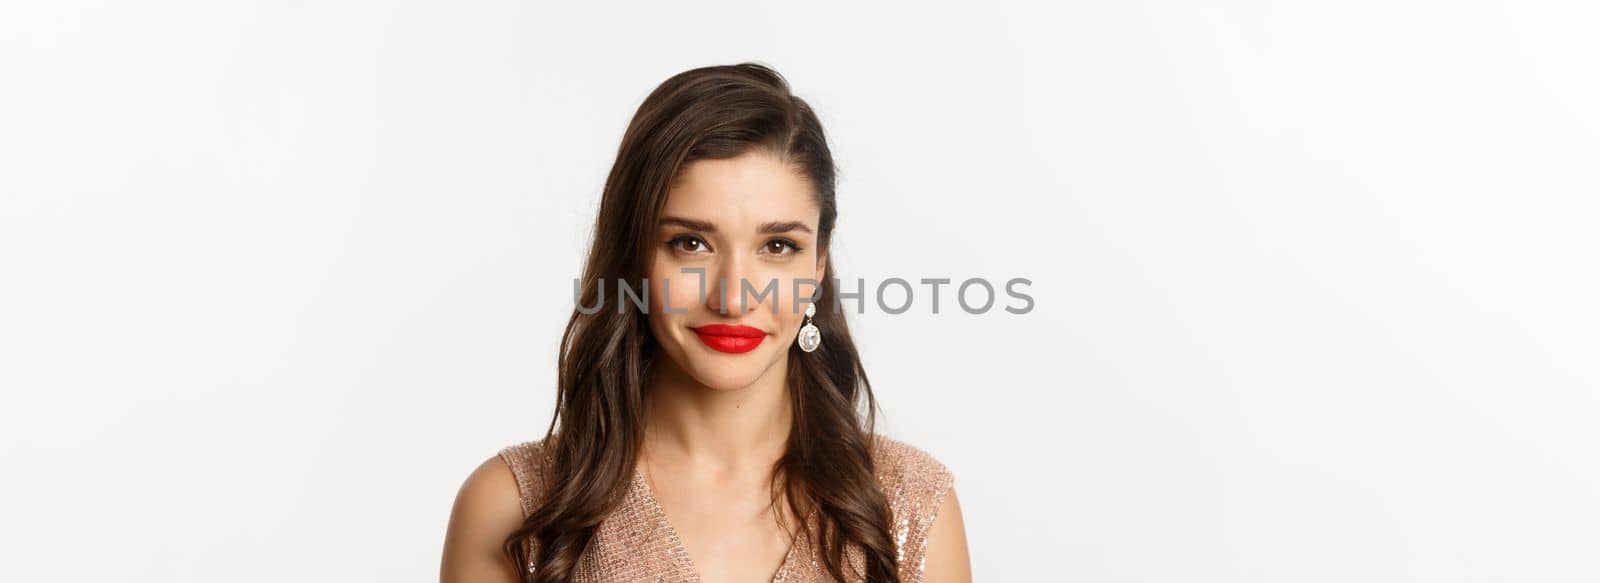 Close-up of attractive woman with hairstyle and red lips, standing in elegant dress and smiling, celebrating Christmas party, standing over white background.